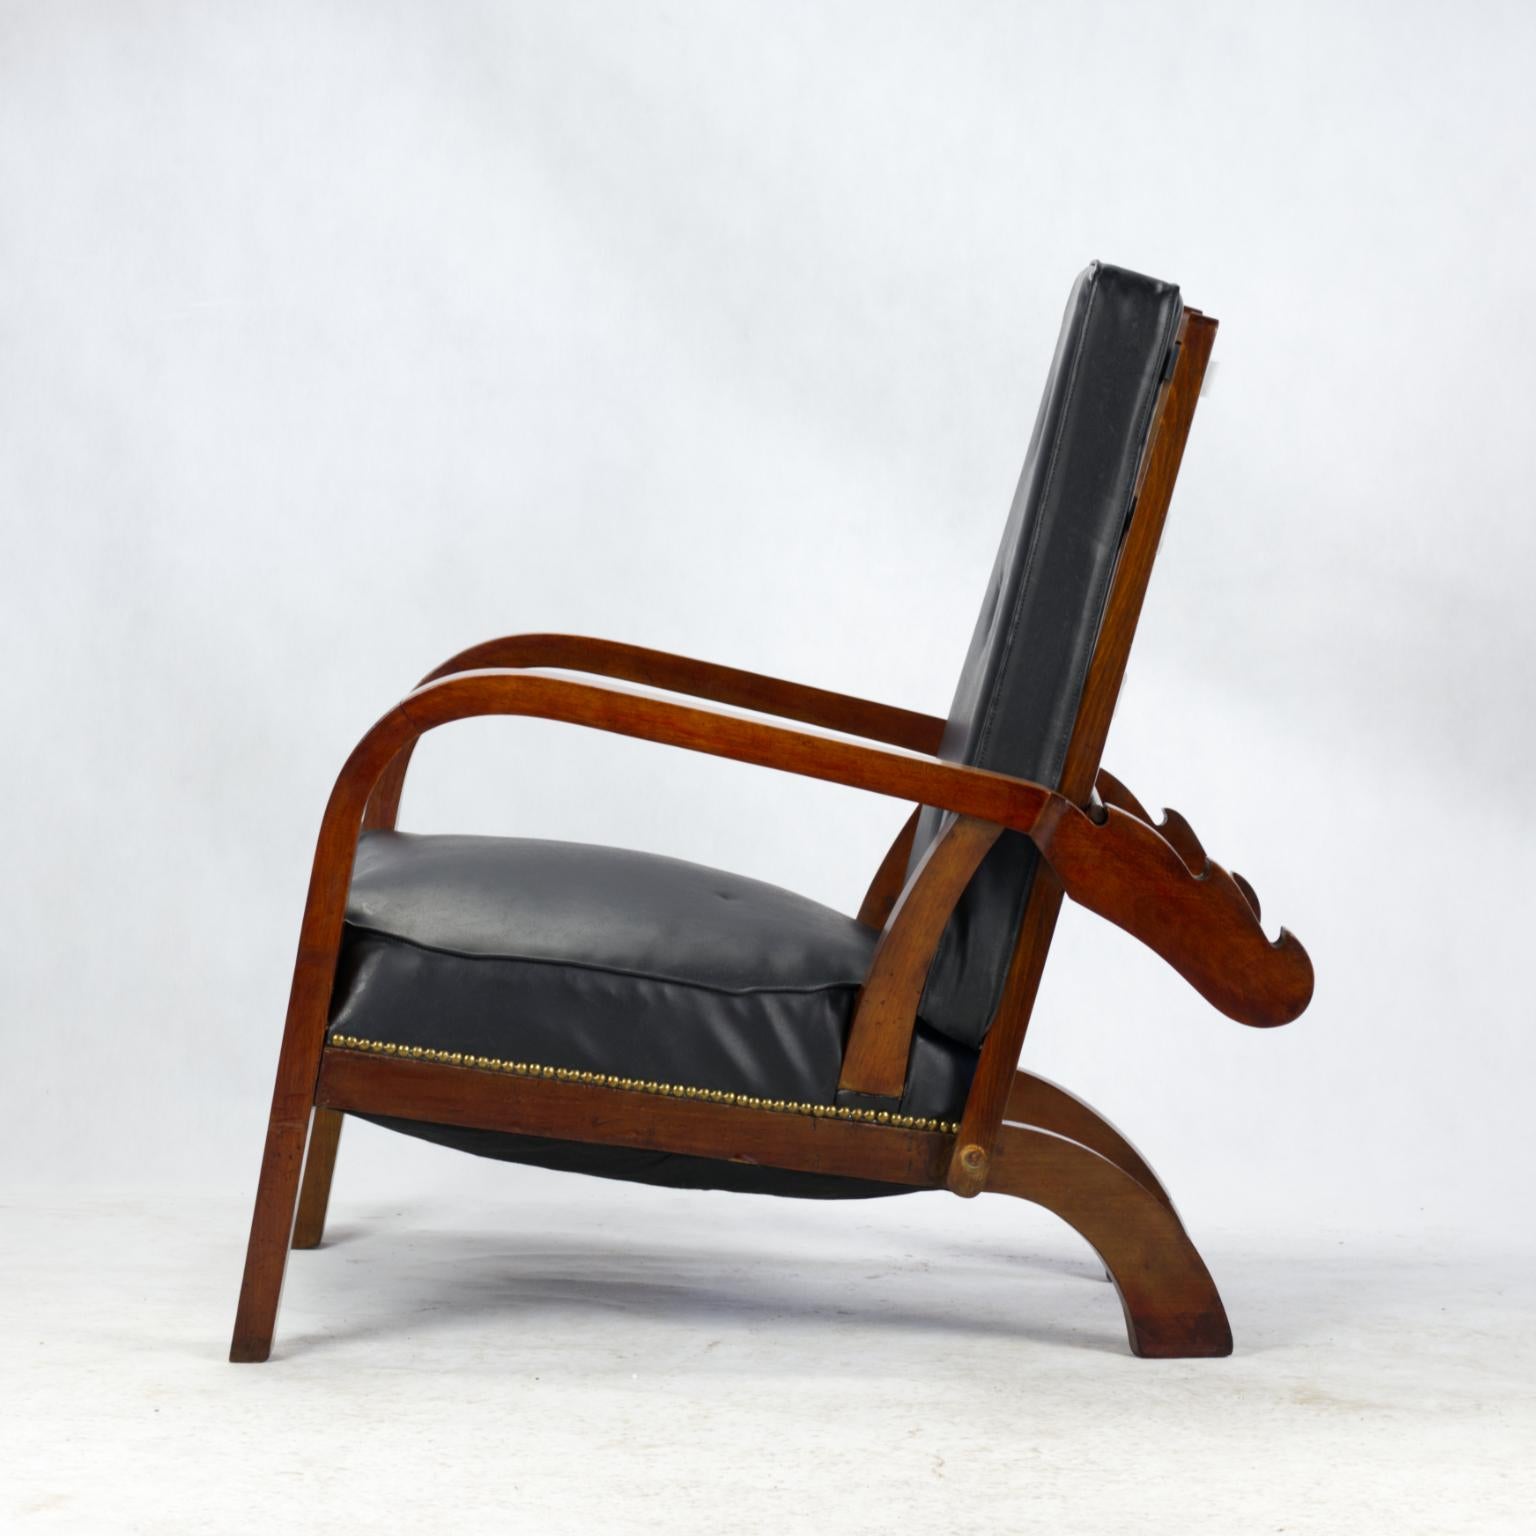 Large Art Deco reclining lounge chair, Czechoslovakia, 1930’s. The backrest and seat can be put in three different positions.The upholstery is not original, it has been reupholstered in leatherette in the past.